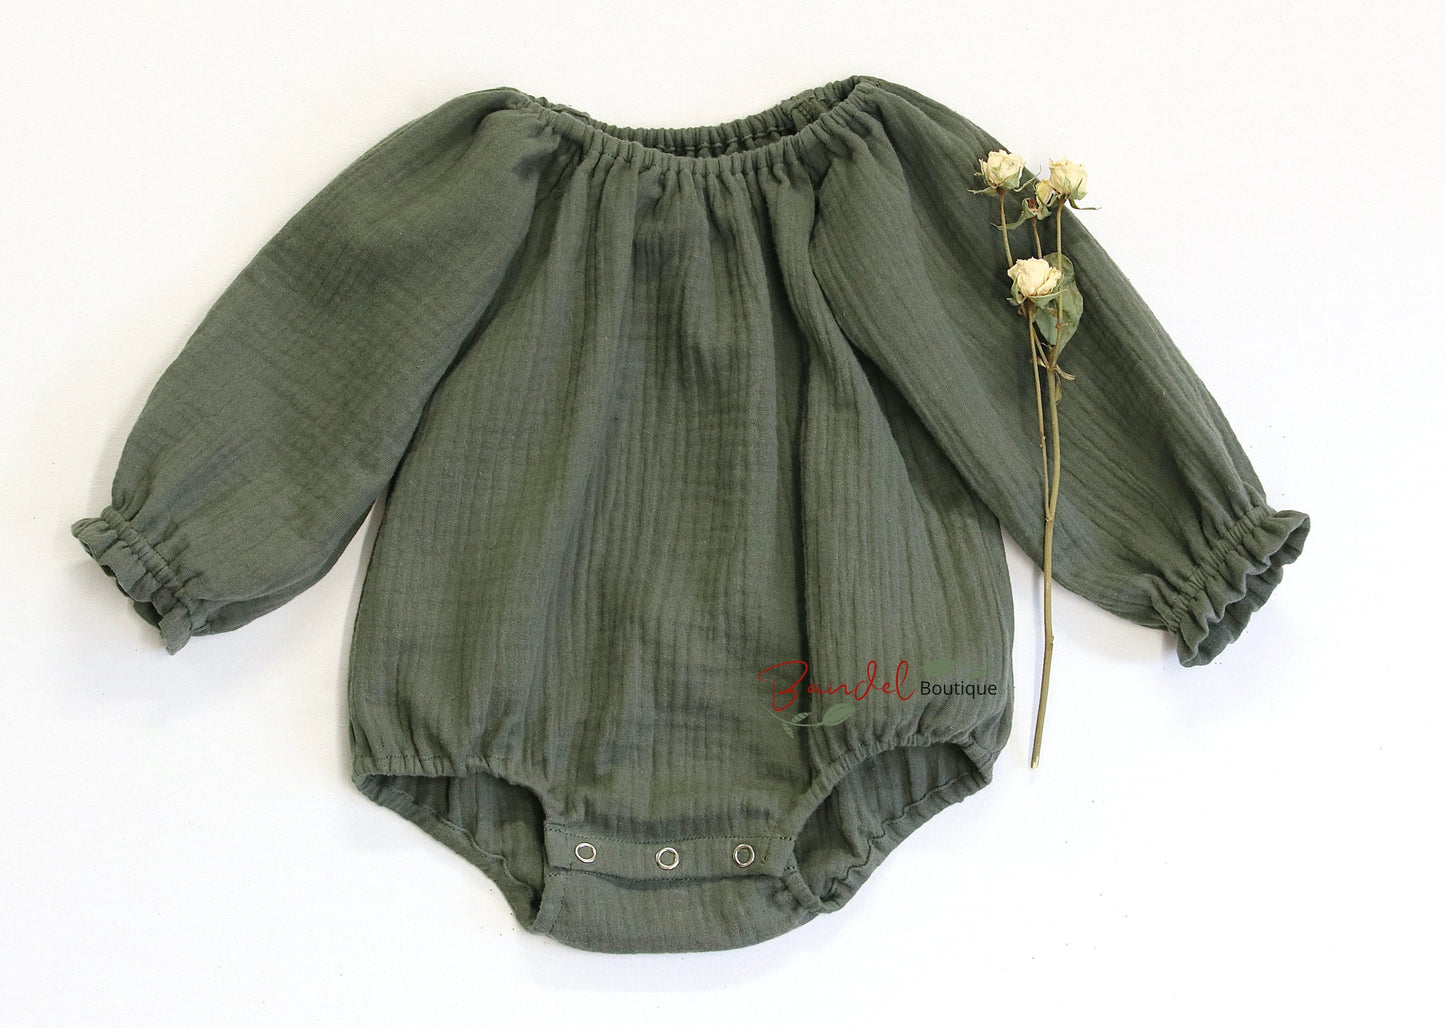 Adorable Olive- Green baby romper made from the finest Double gauze fabric. Long sleeve romper features elastic leg openings, arms, and neck for a comfortable fit. The snaps at the crotch allow for easy diaper changes. Soft and breathable double gauze fabric keeps your little one cozy and cool. Perfect for everyday wear or special occasions, this olive green baby romper combines style and functionality. Handmade with care and love in The Netherlands.